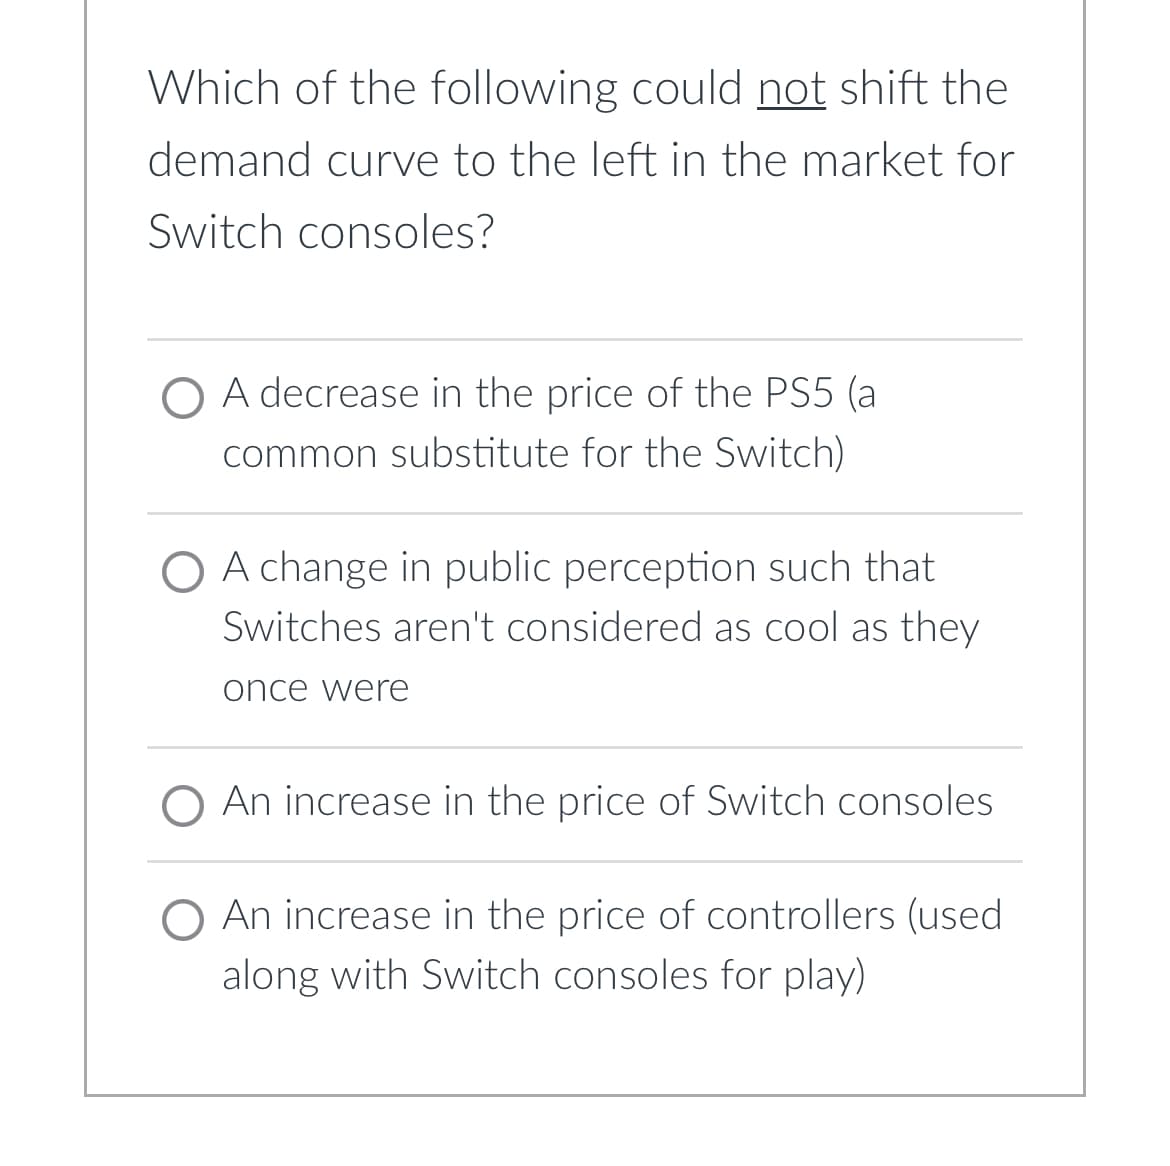 Which of the following could not shift the
demand curve to the left in the market for
Switch consoles?
O A decrease in the price of the PS5 (al
common substitute for the Switch)
O A change in public perception such that
Switches aren't considered as cool as they
once were
O An increase in the price of Switch consoles
O An increase in the price of controllers (used
along with Switch consoles for play)